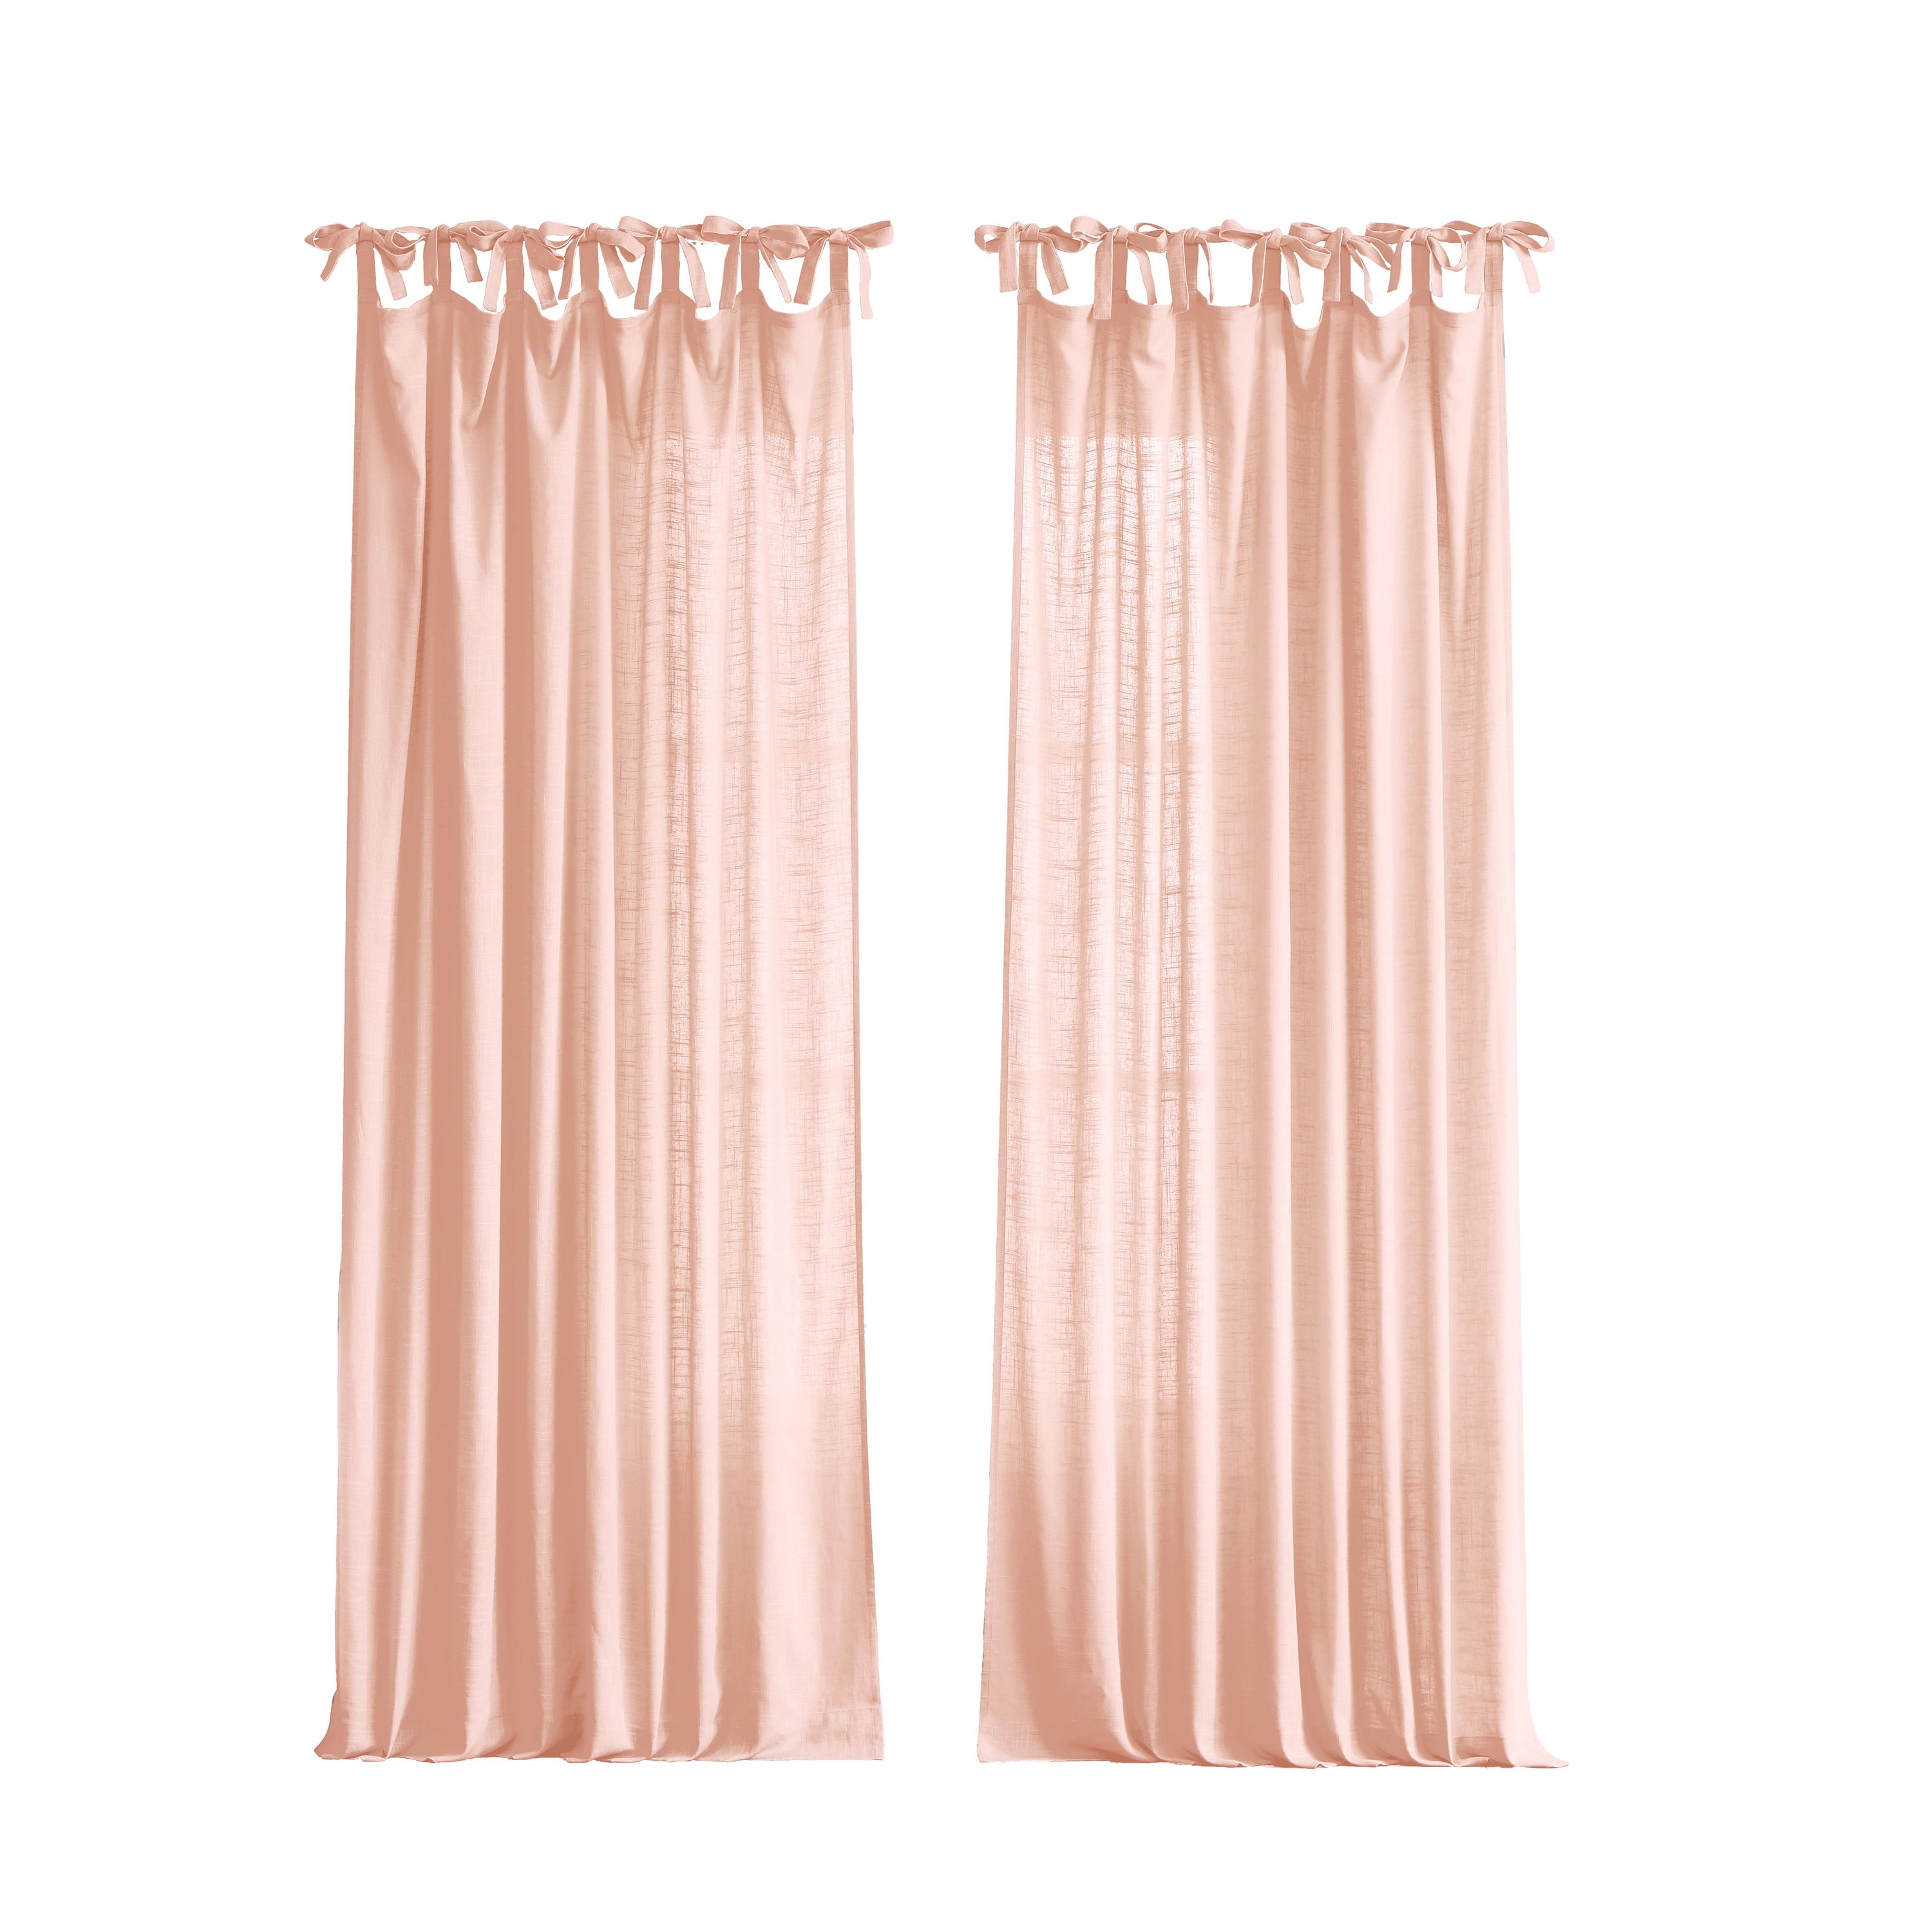 allen + roth 108-in Blush Rayon/Linen Light Filtering Tie Top Single Panel in the Curtains & Drapes at